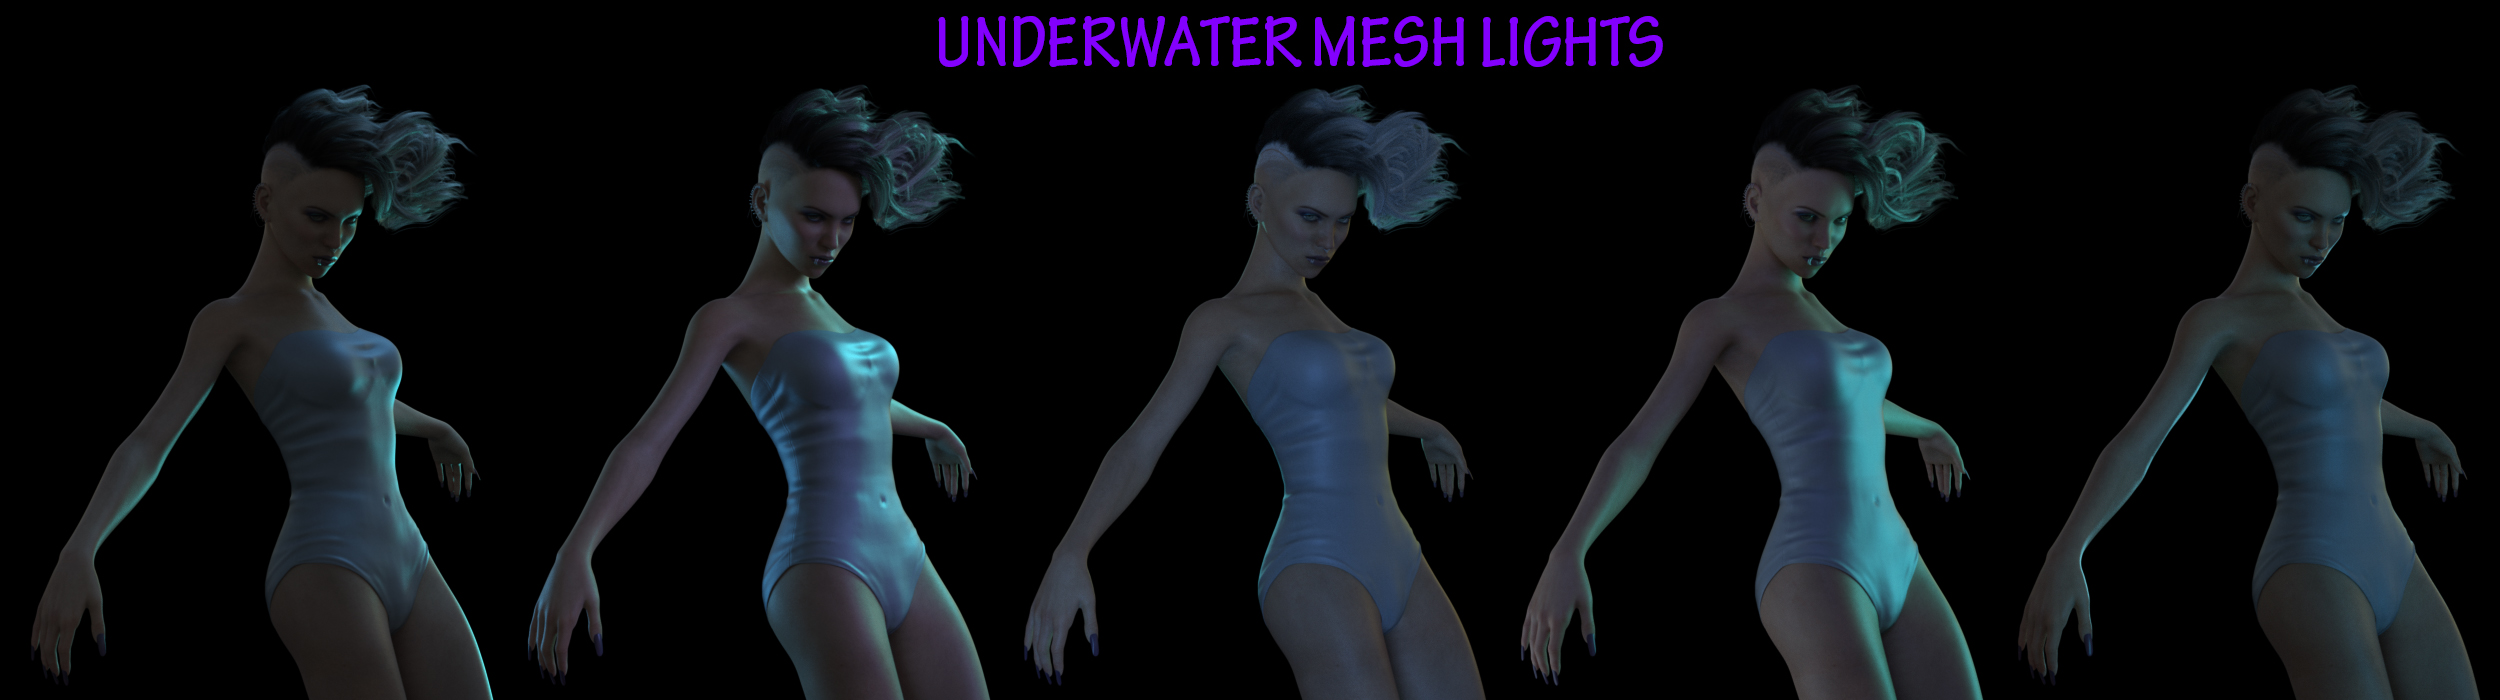 Luminosity Black: Iray Mesh Lighting System for Low Light Settings by: Skyewolf, 3D Models by Daz 3D